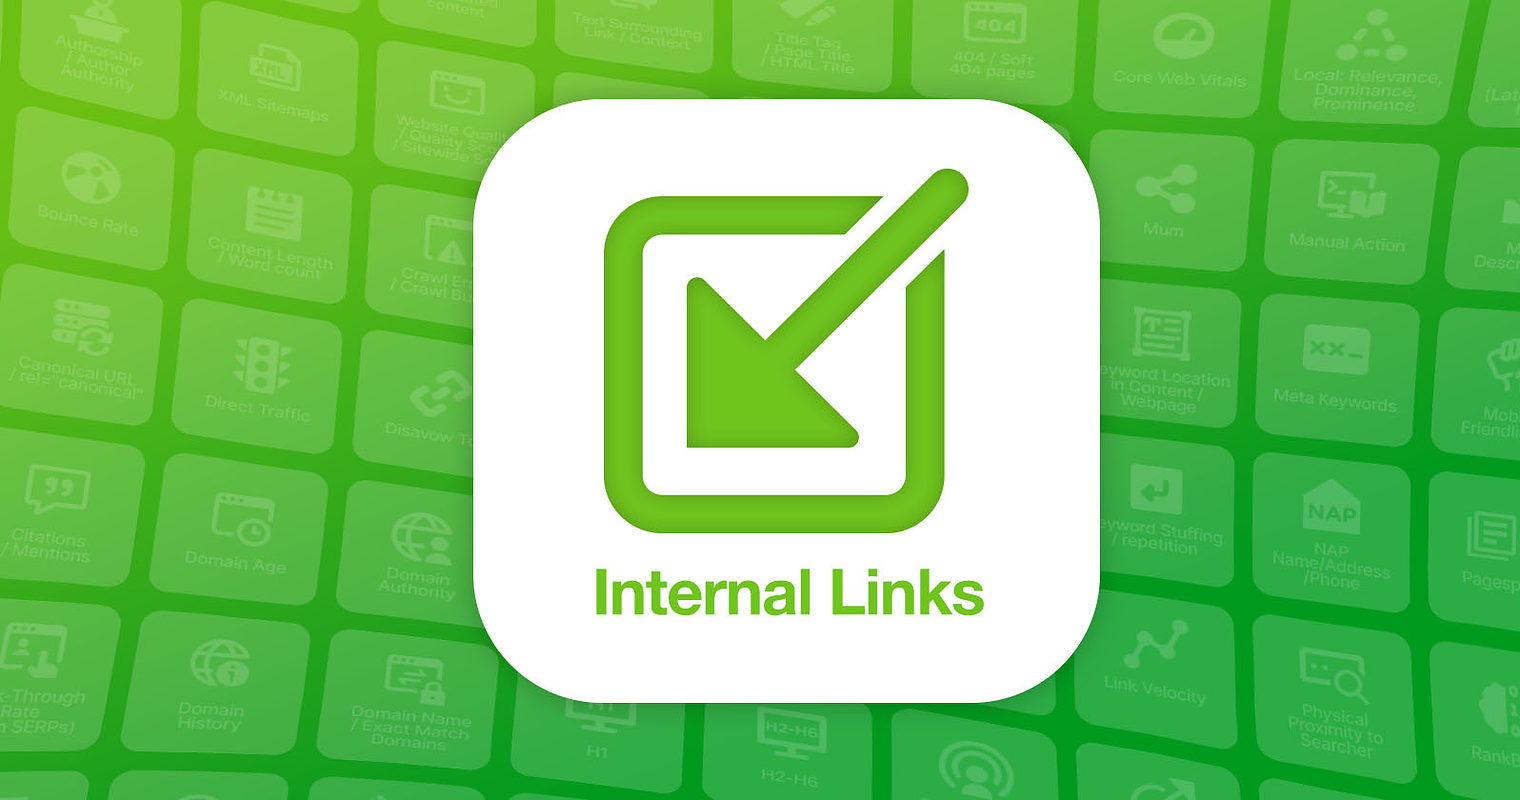 Are Internal Links A Ranking Factor?